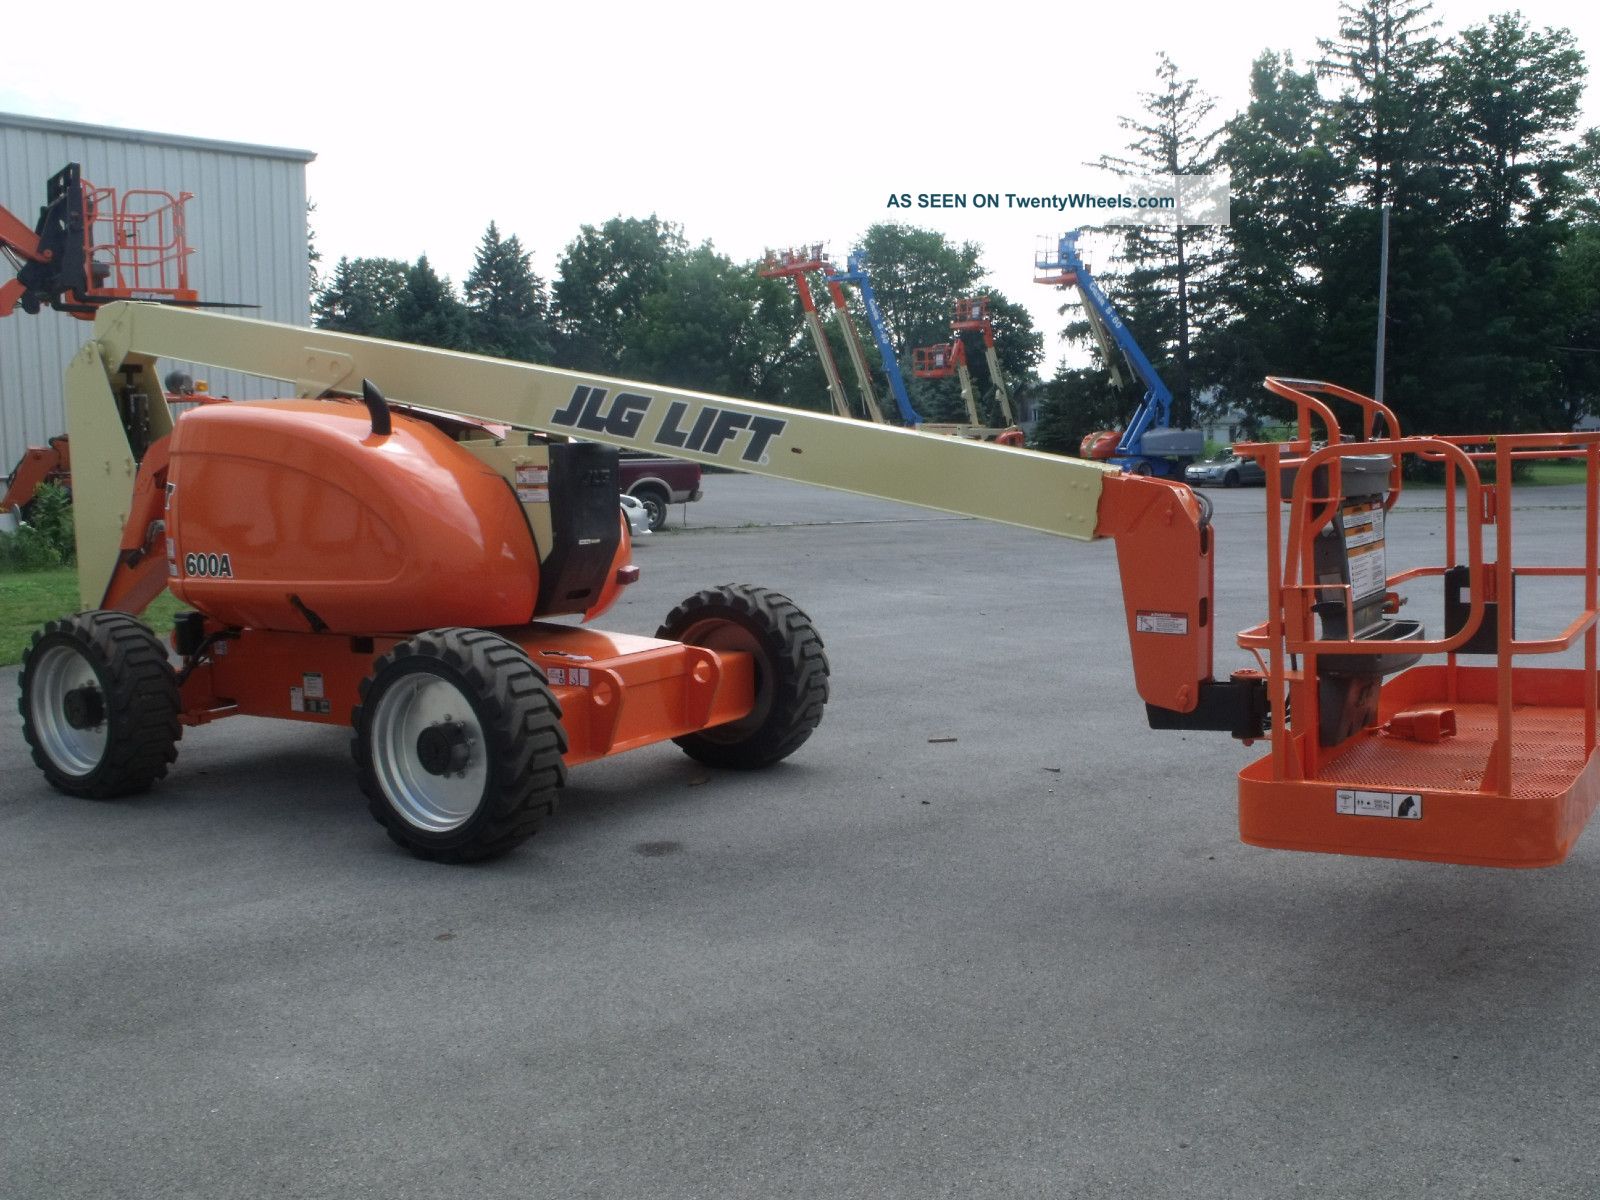 2007 Jlg 600a Aerial Articulating Manlift Boom Lift Man Boomlift With